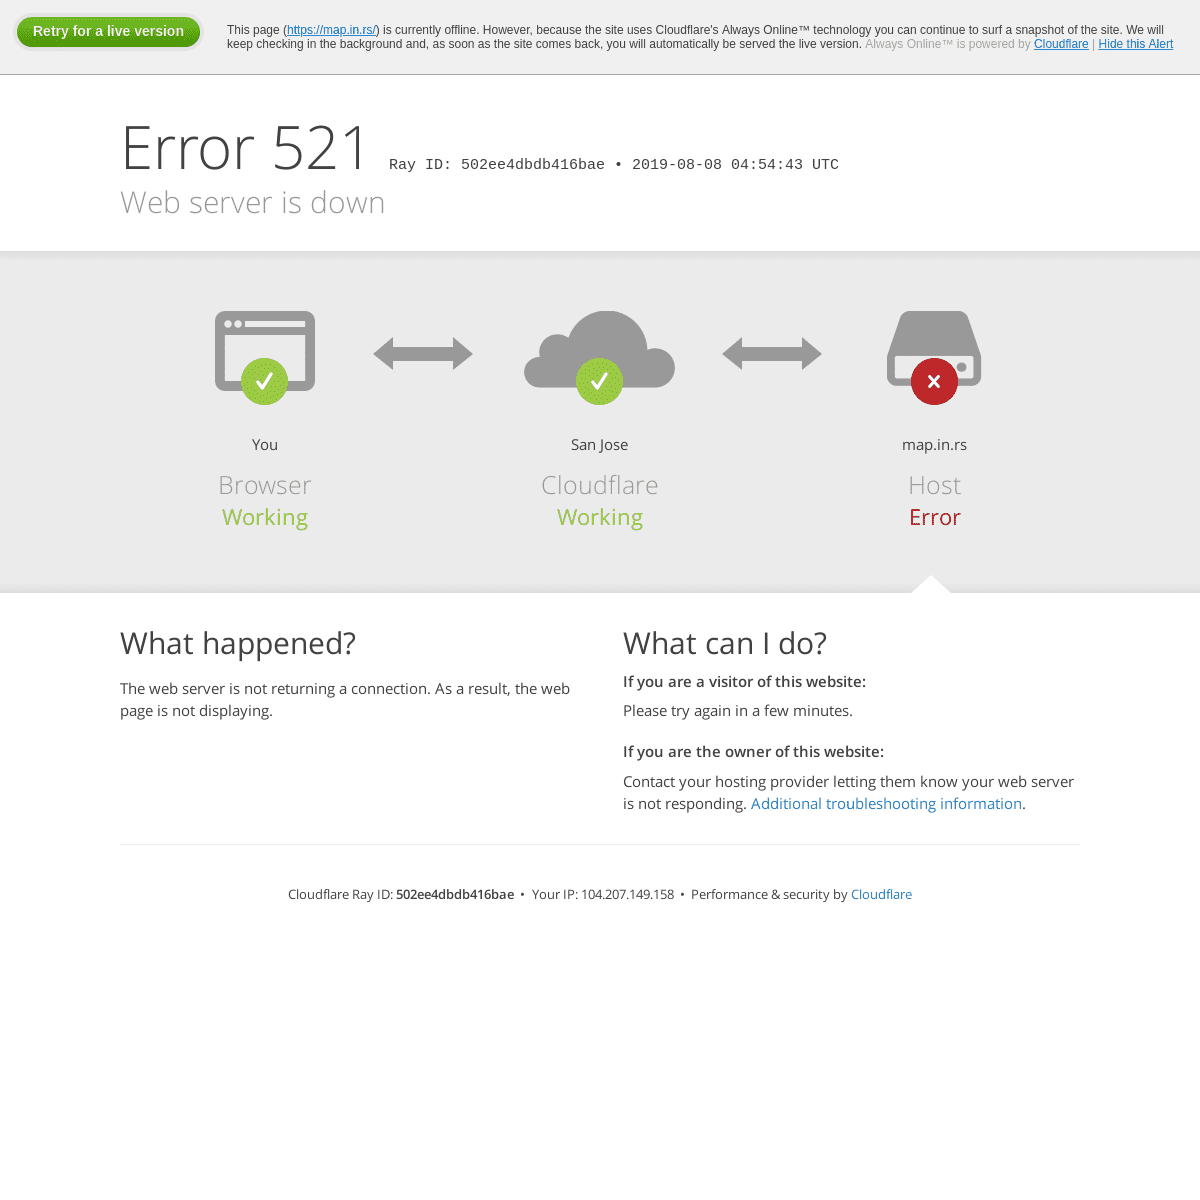 map.in.rs | 521: Web server is down